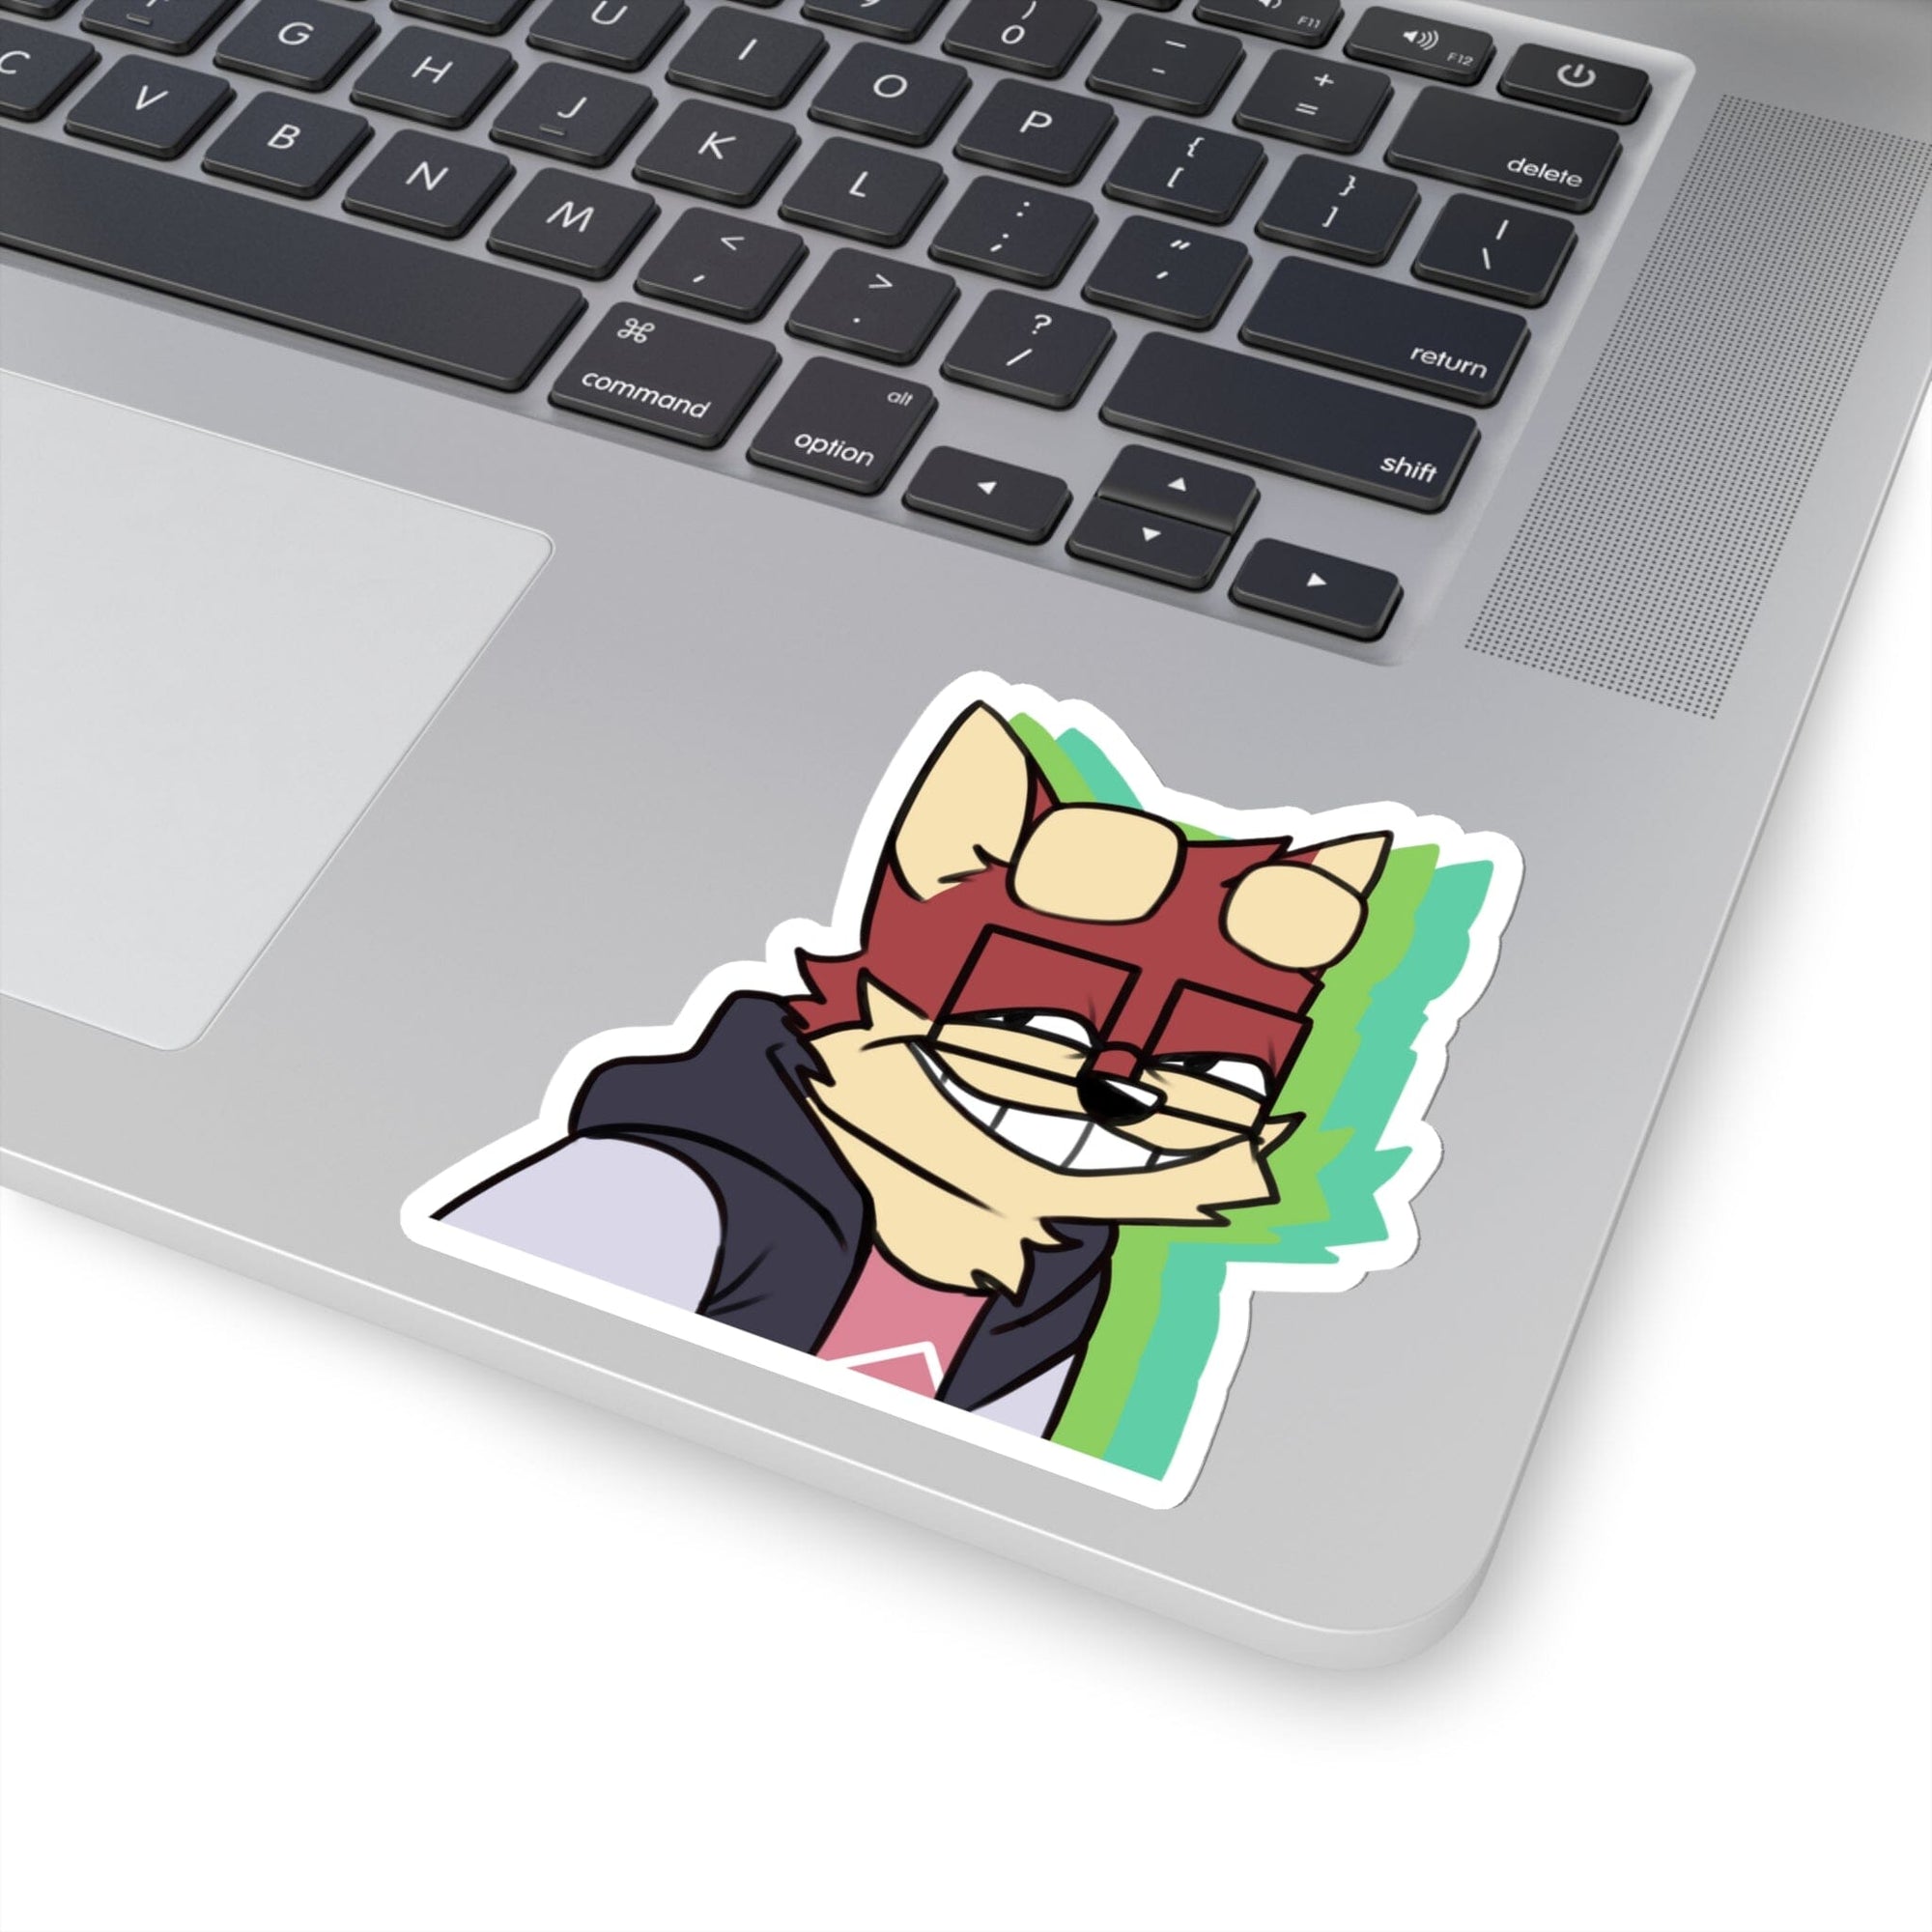 Thinking About You - Sticker Sticker Ooka 